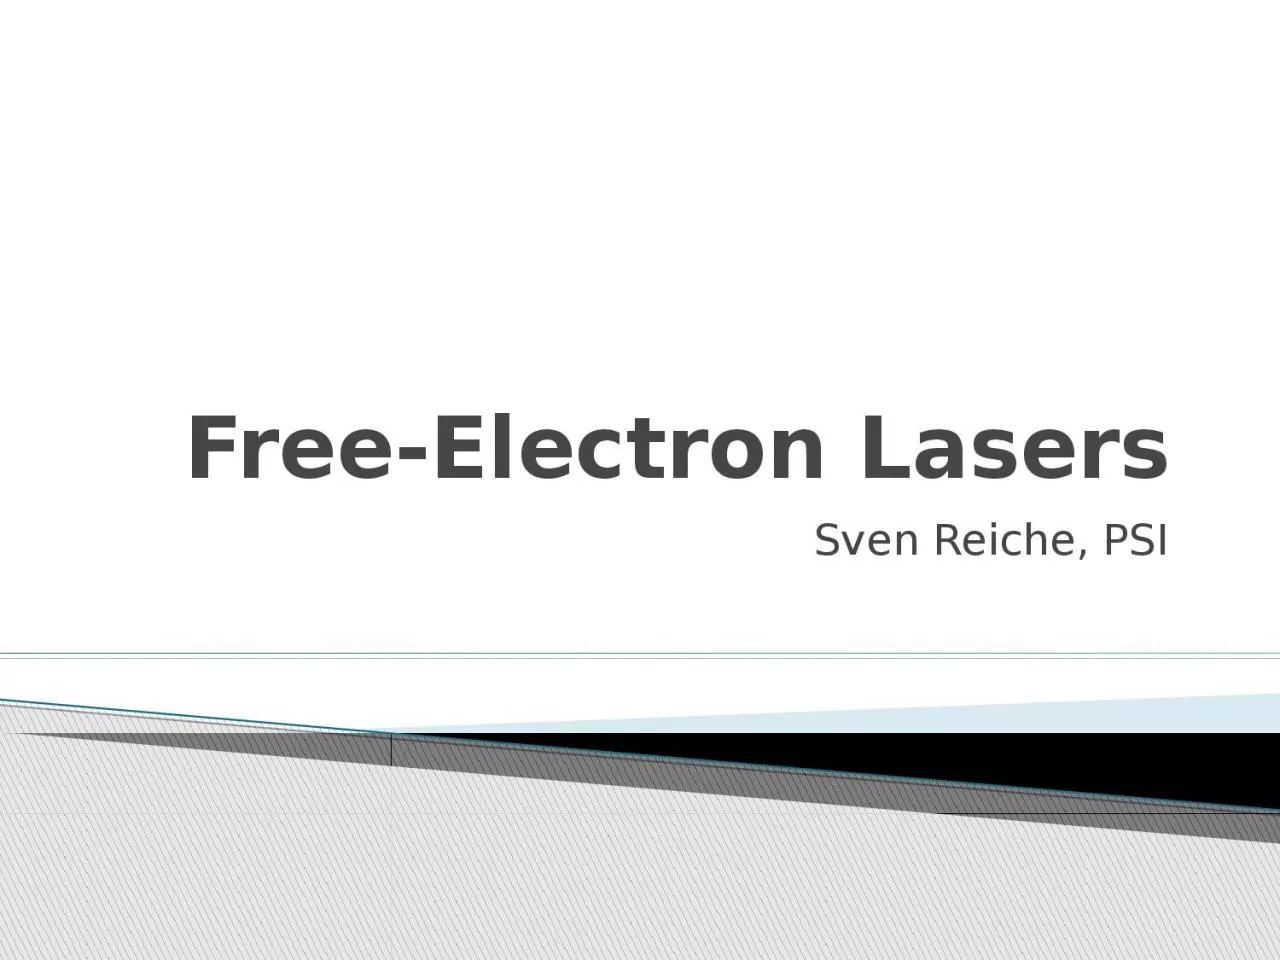 Free-Electron Lasers Sven Reiche, PSI